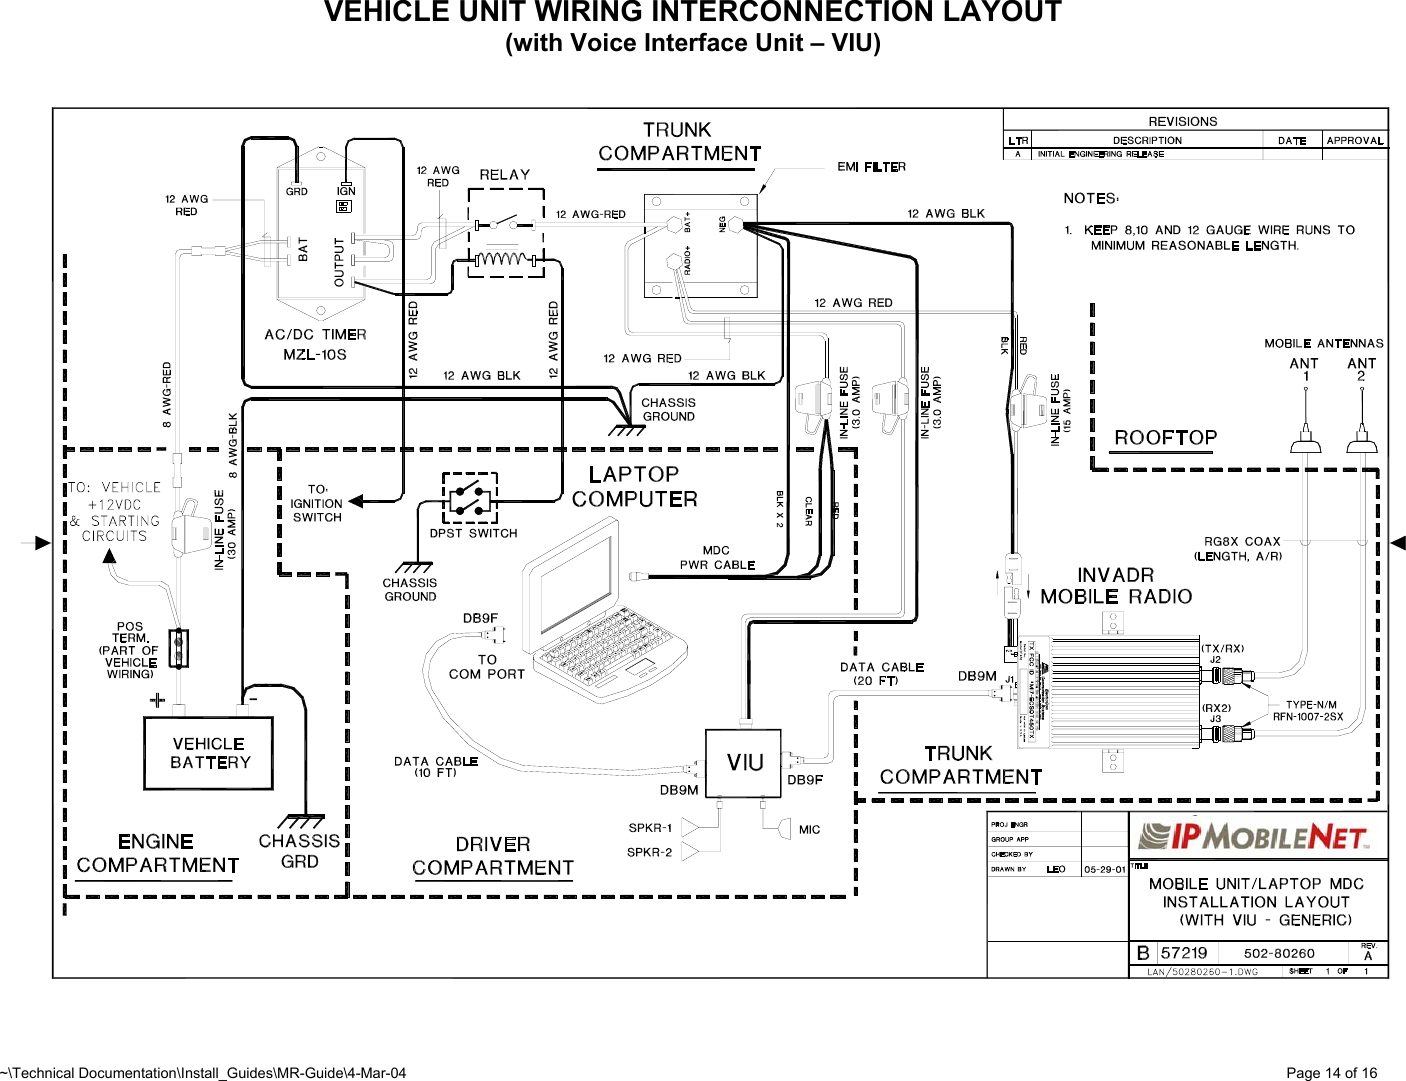 ~\Technical Documentation\Install_Guides\MR-Guide\4-Mar-04   Page 14 of 16 VEHICLE UNIT WIRING INTERCONNECTION LAYOUT (with Voice Interface Unit – VIU)                      